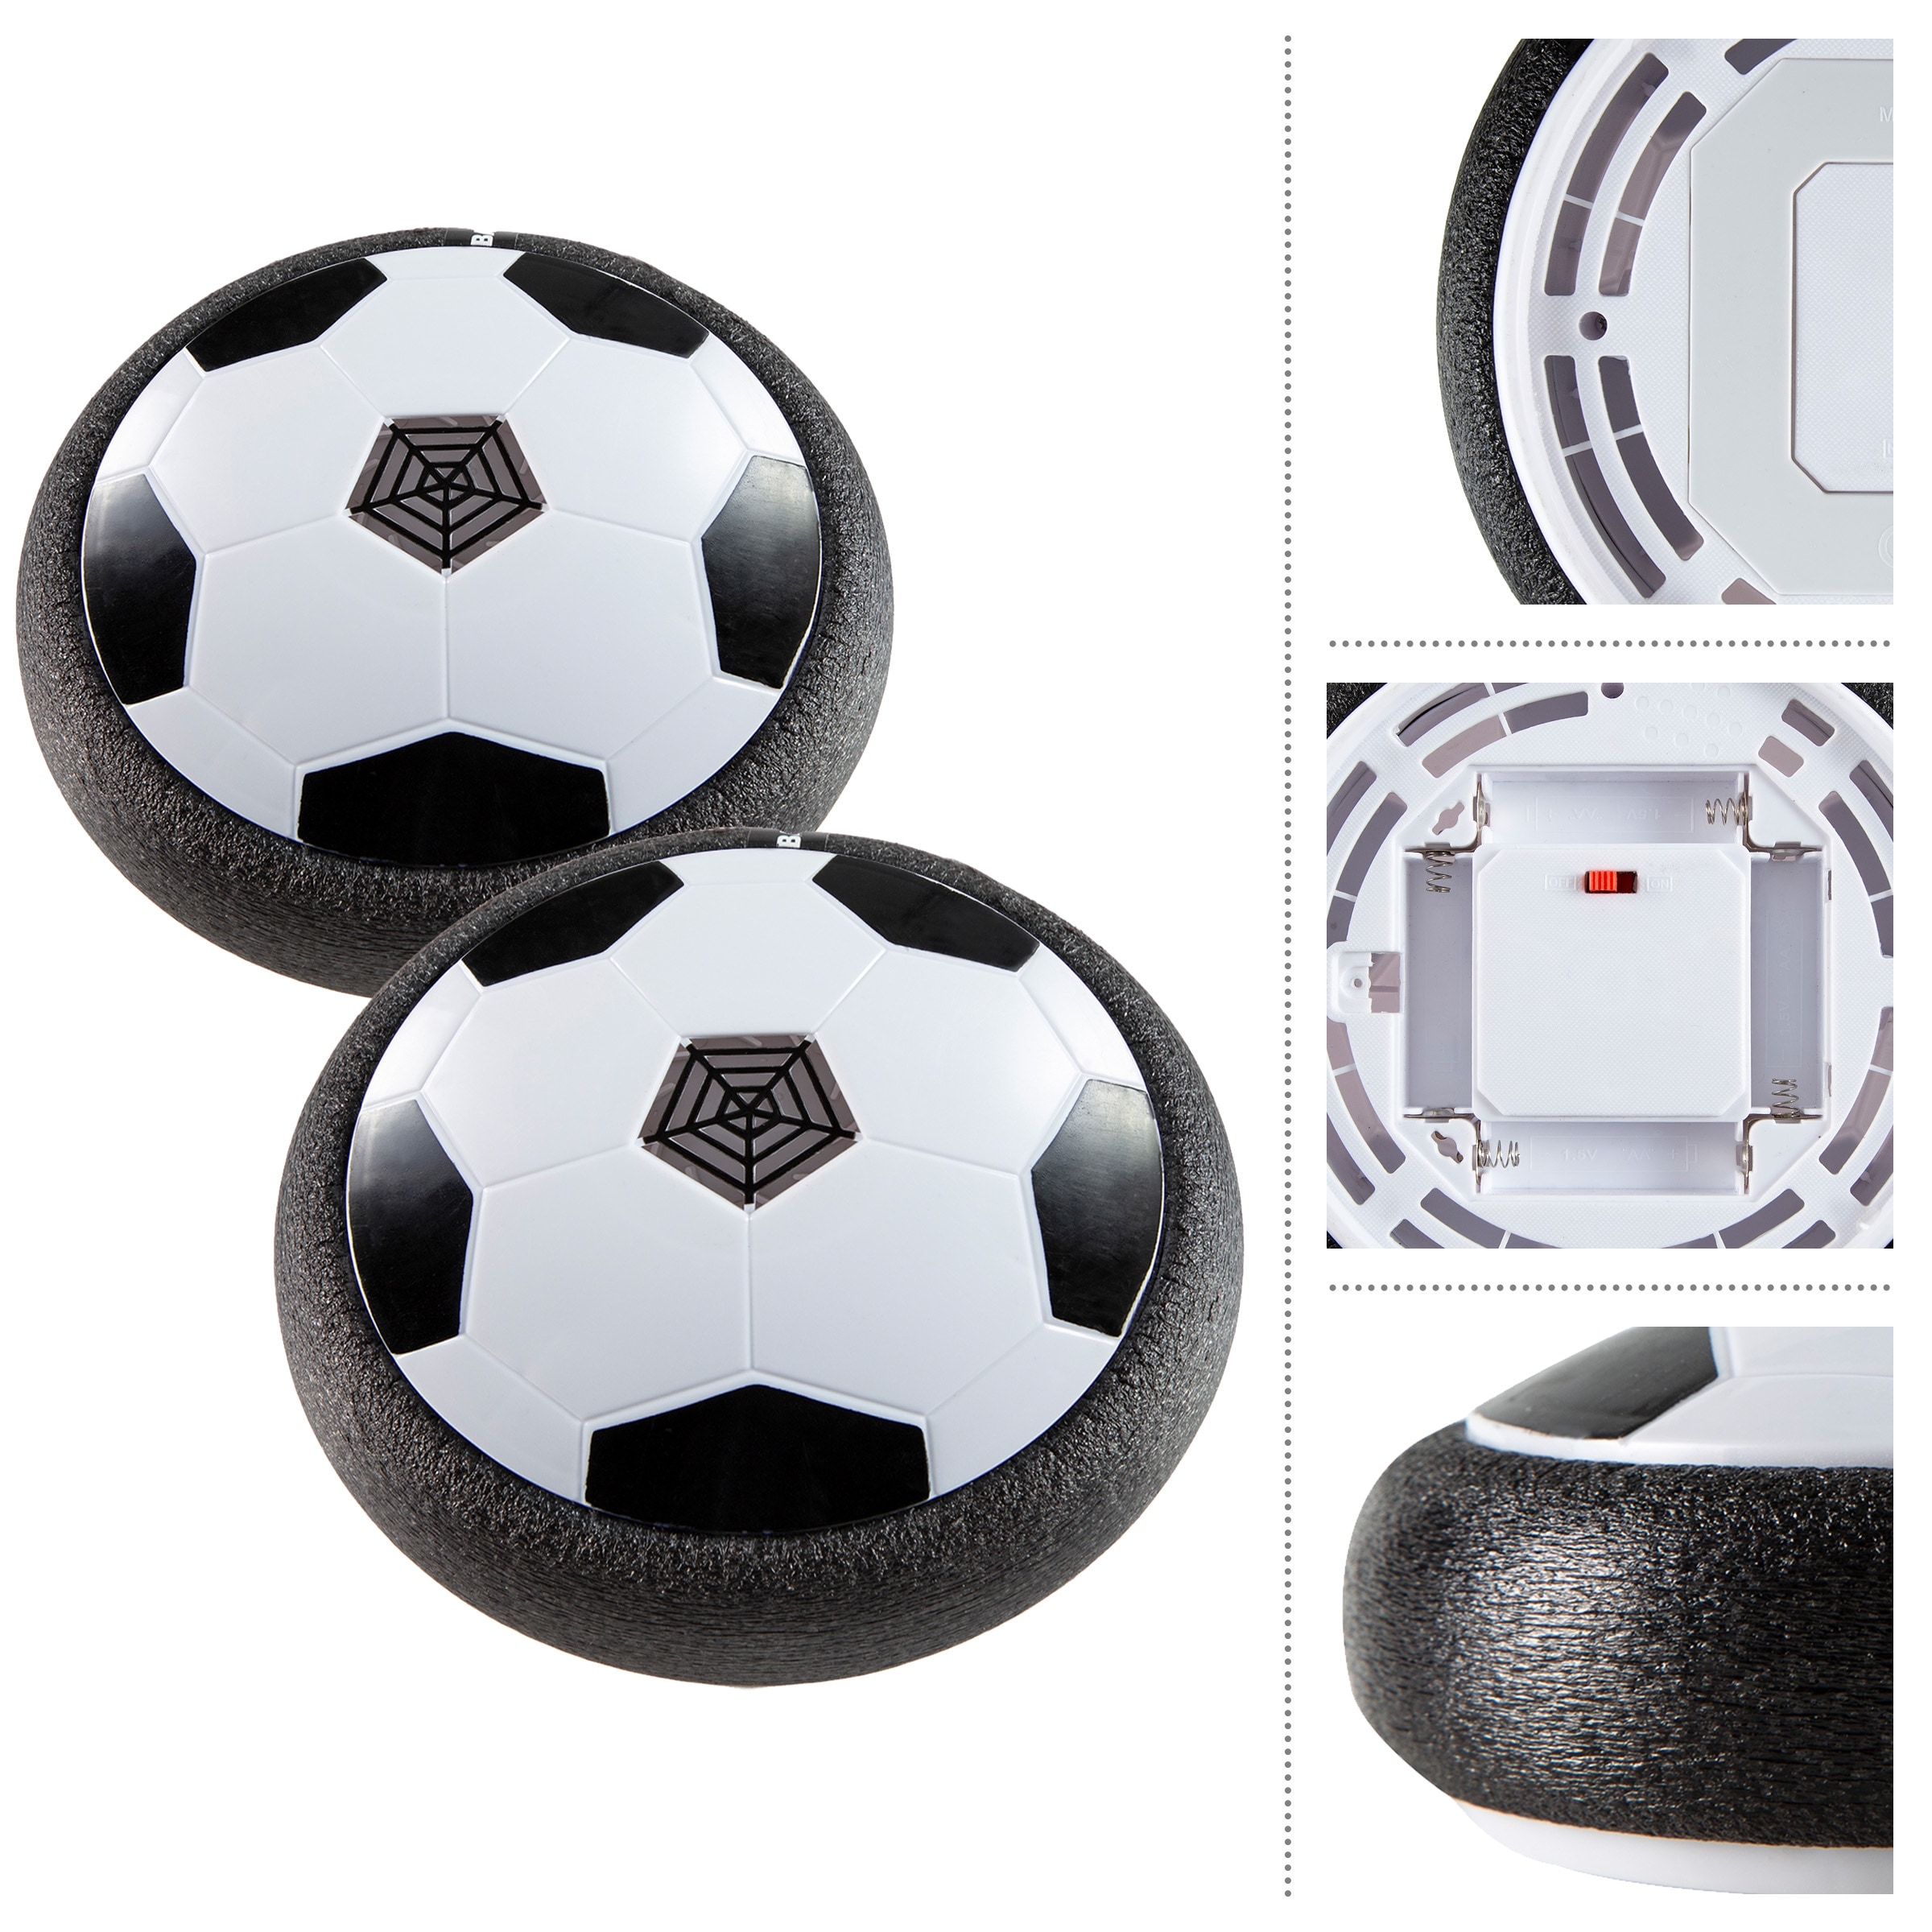 Trademark Games Hover Ball 2-Pack Air Soccer Balls with Soft Bumpers